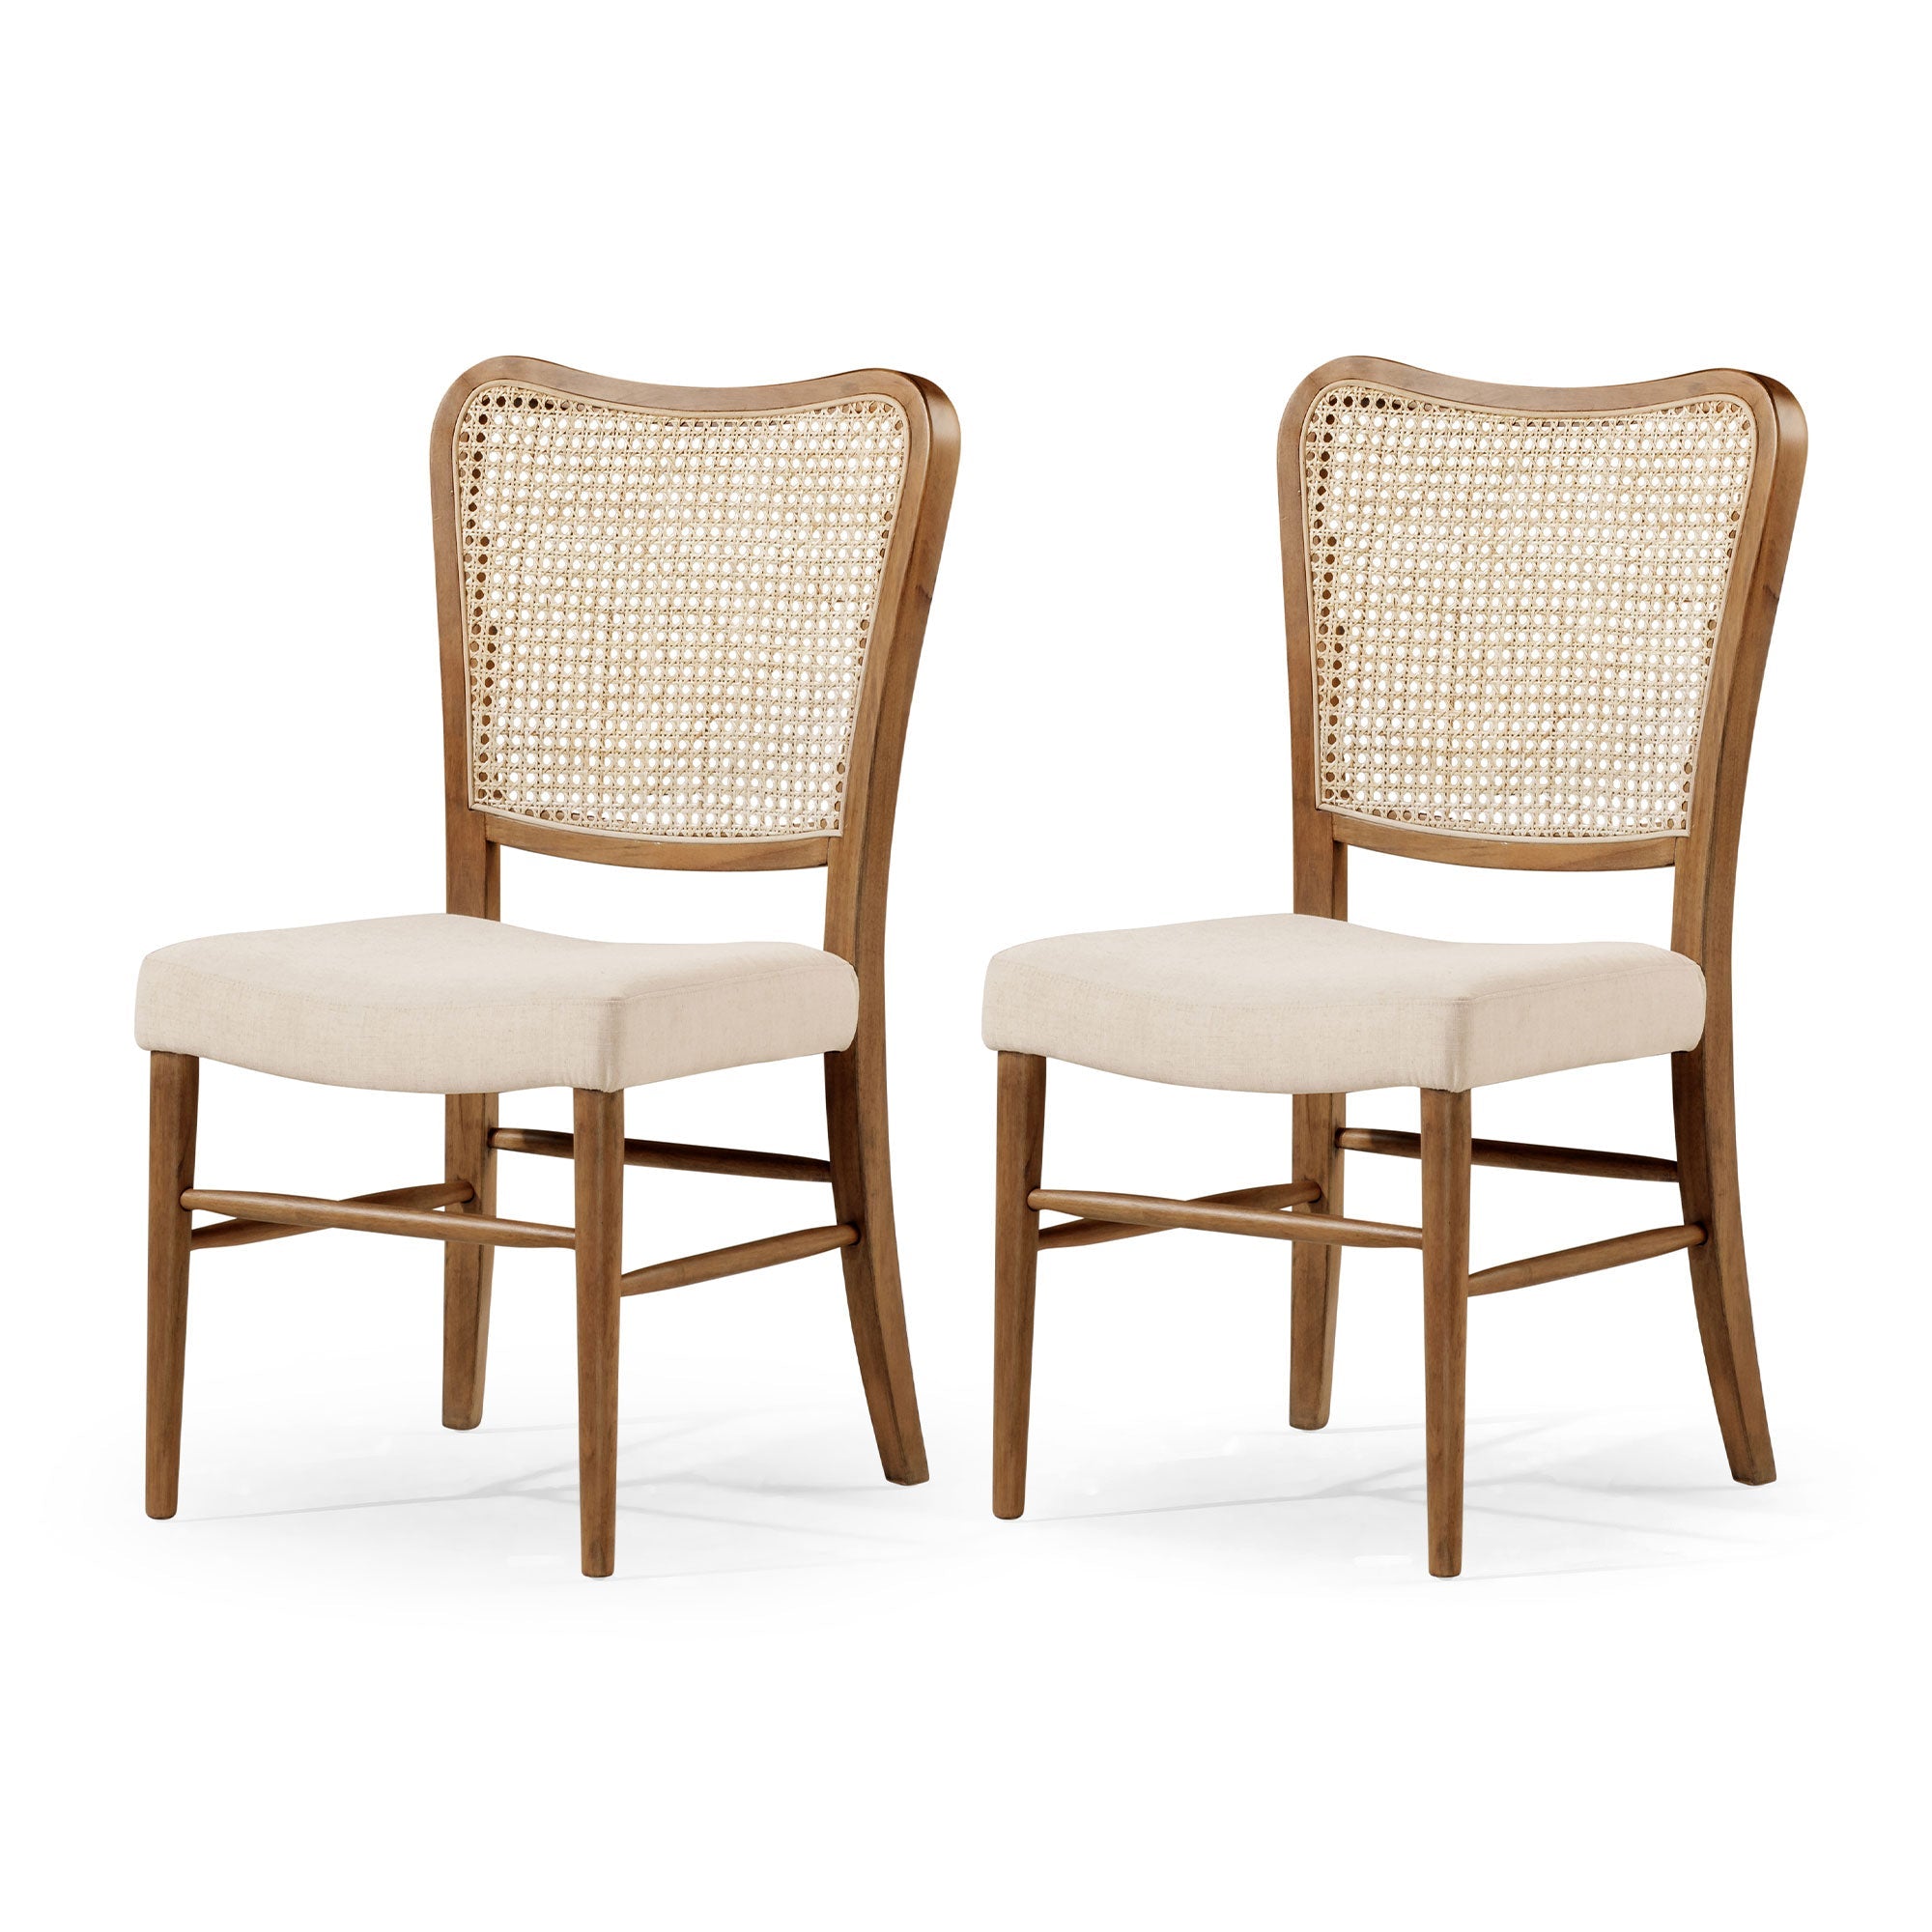 Vera Classical Wooden Dining Chair in Antiqued Natural Finish with Taupe Linen Fabric Upholstery, Set of 2 in Dining Furniture by Maven Lane